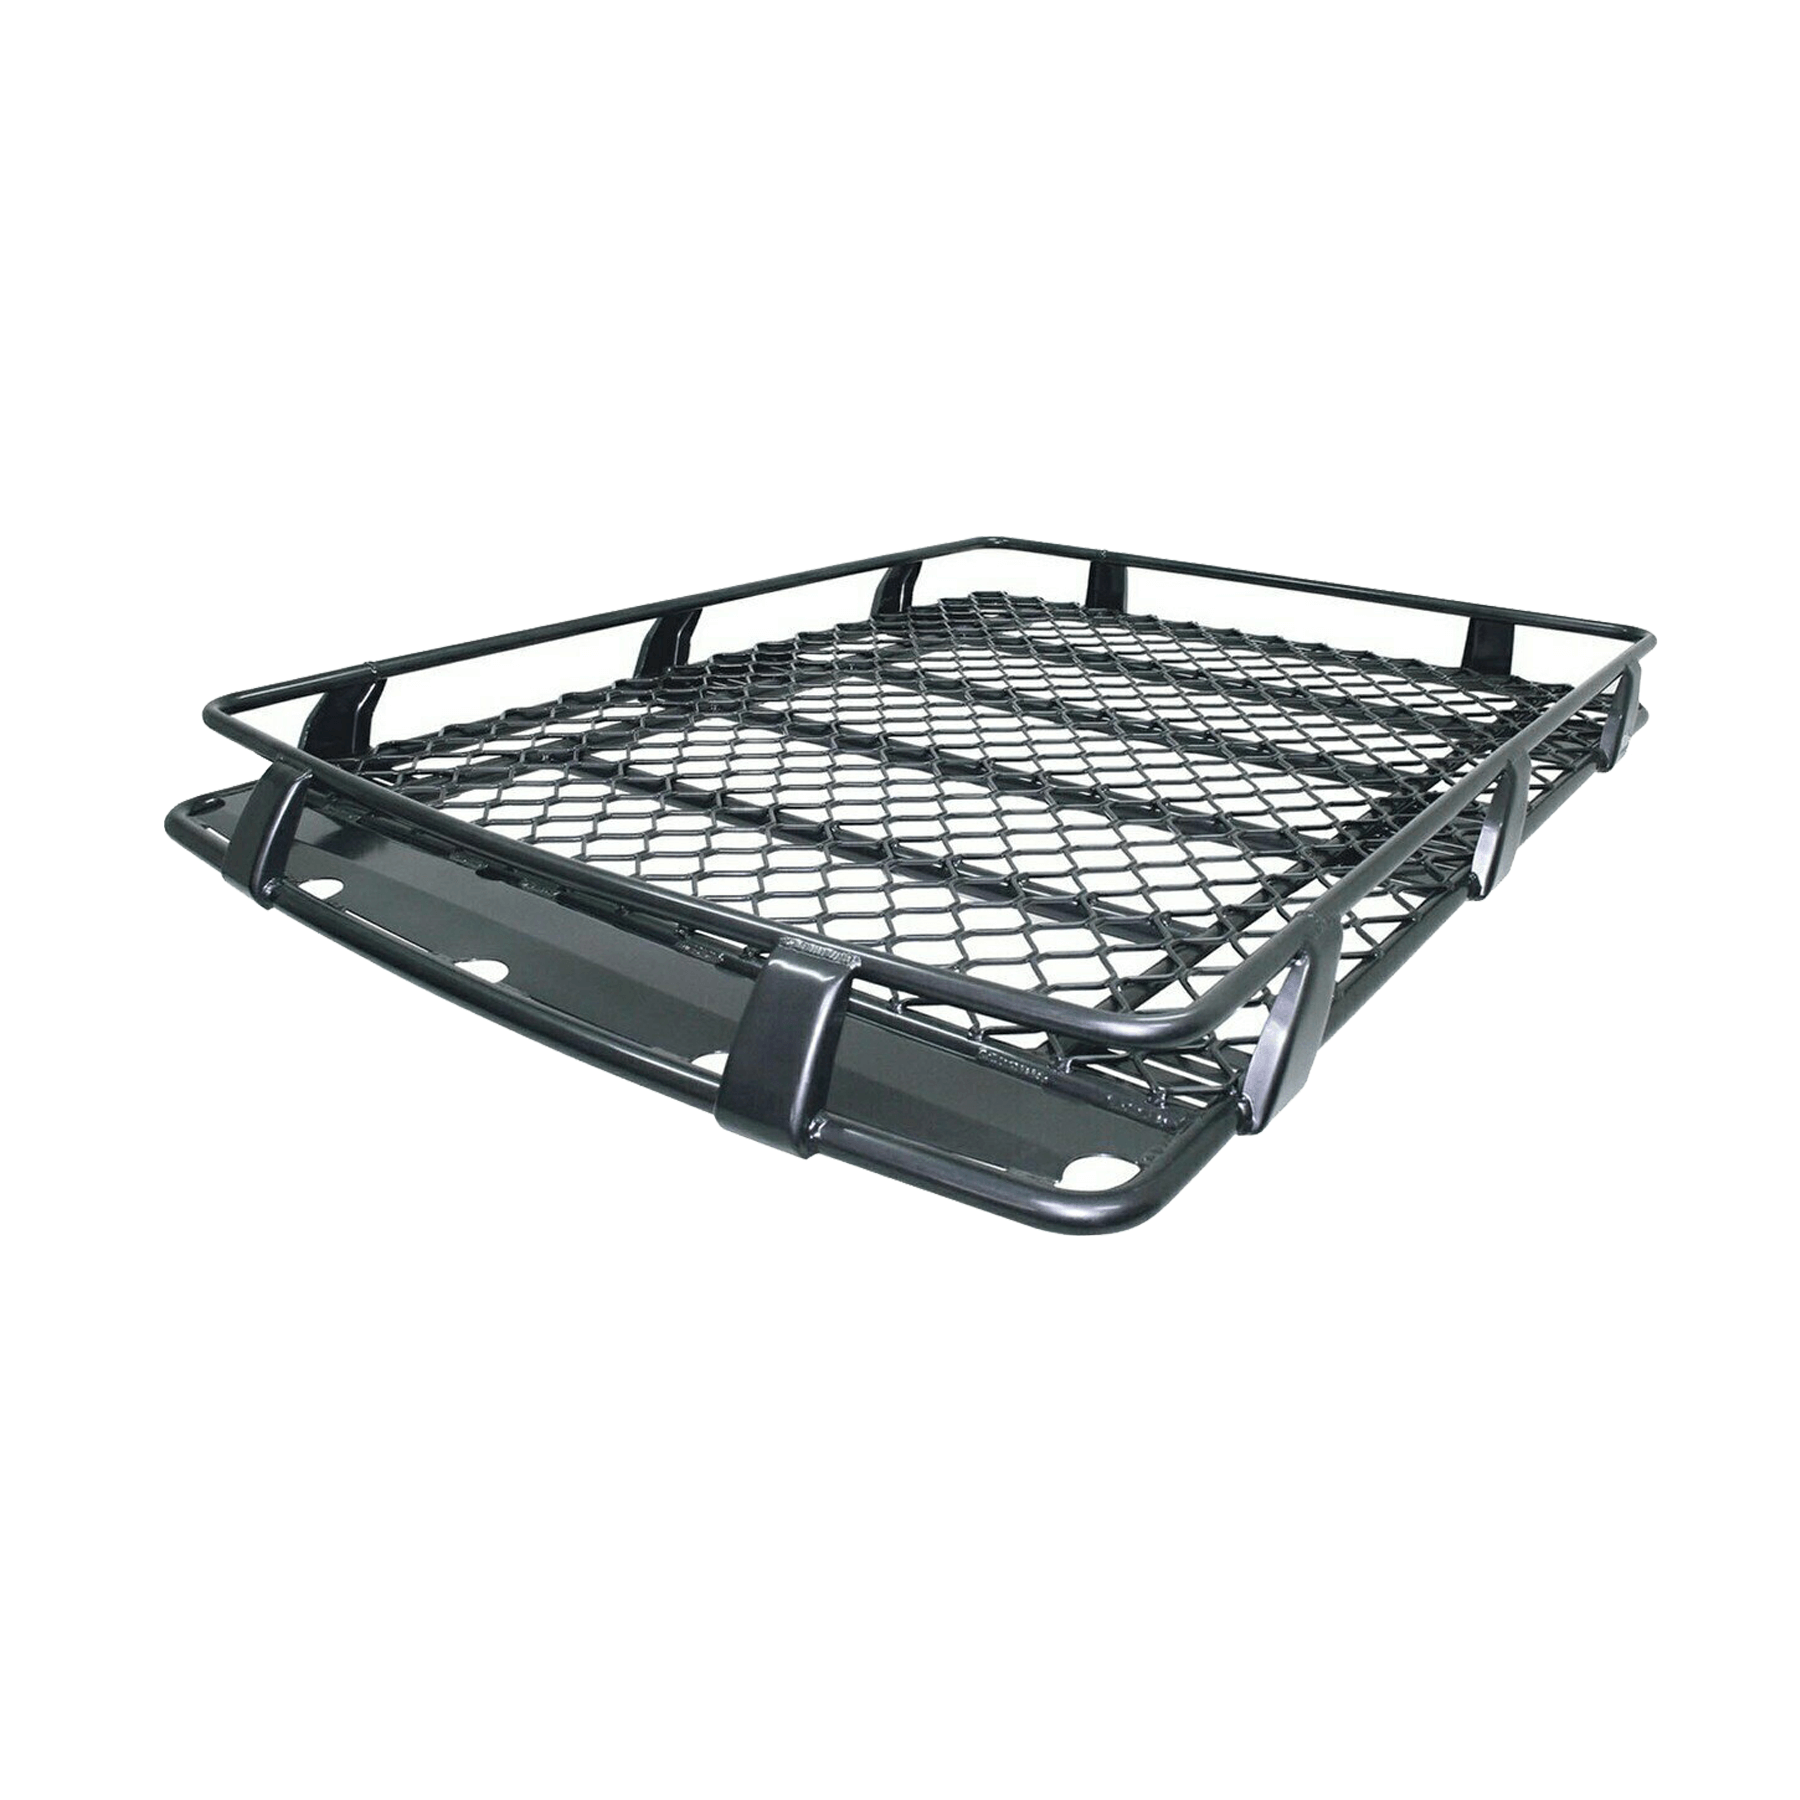 MUX 2014 to 2017+ Basket Alloy Roof Rack- 1.8m x 1.25m (Open end)